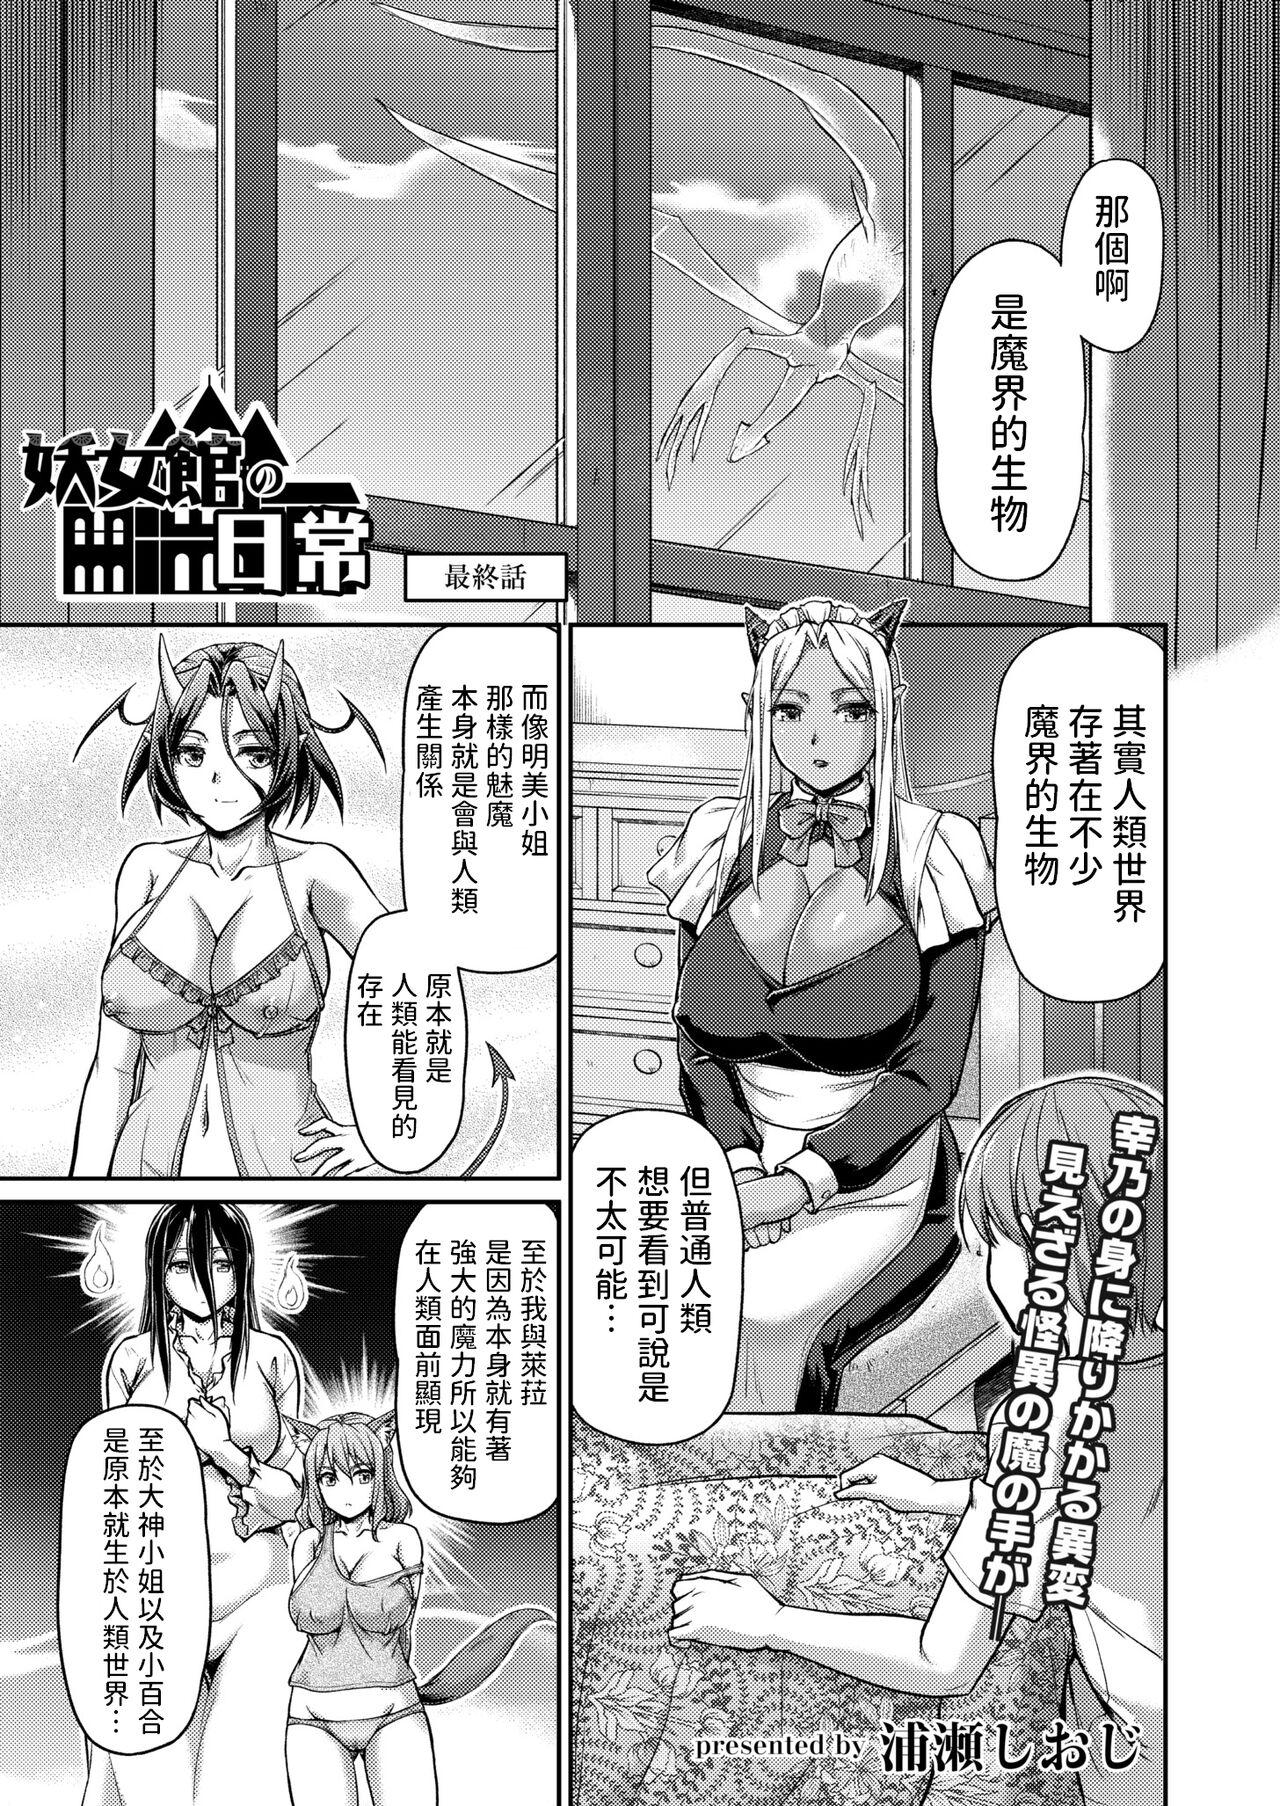 Gay Trimmed [浦瀬しおじ] 妖女館の日常 最終話 (COMIC 快艶 VOL.03) 中文翻譯 Asian Babes - Picture 1